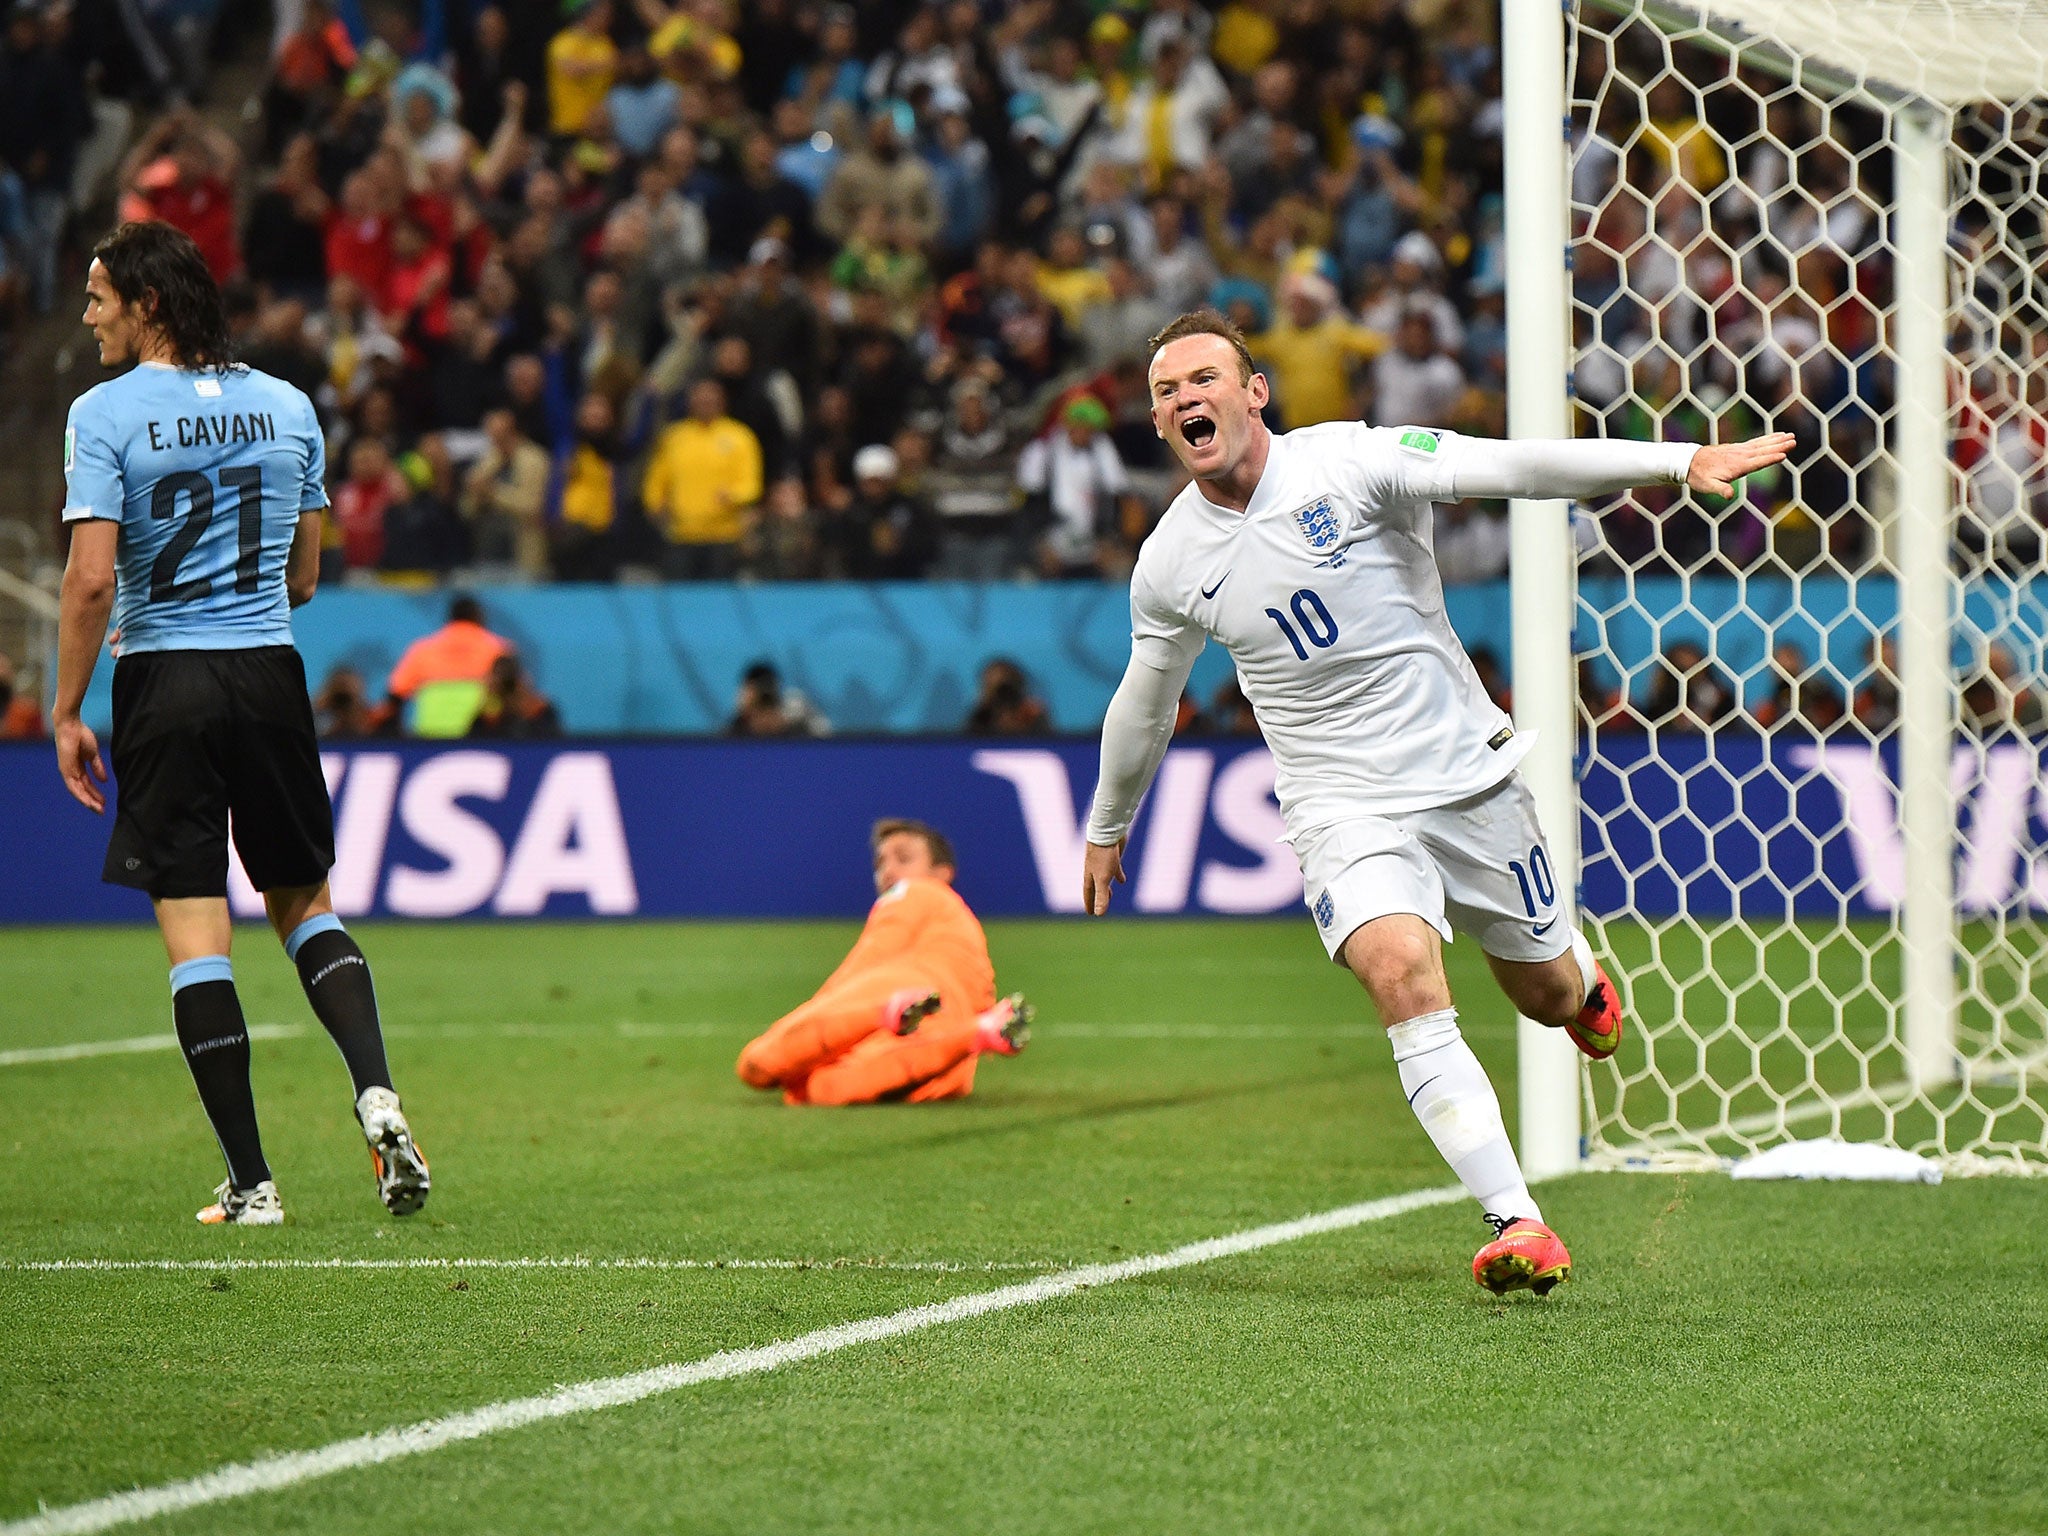 Wayne Rooney ended a 760 minute wait for a World Cup goal